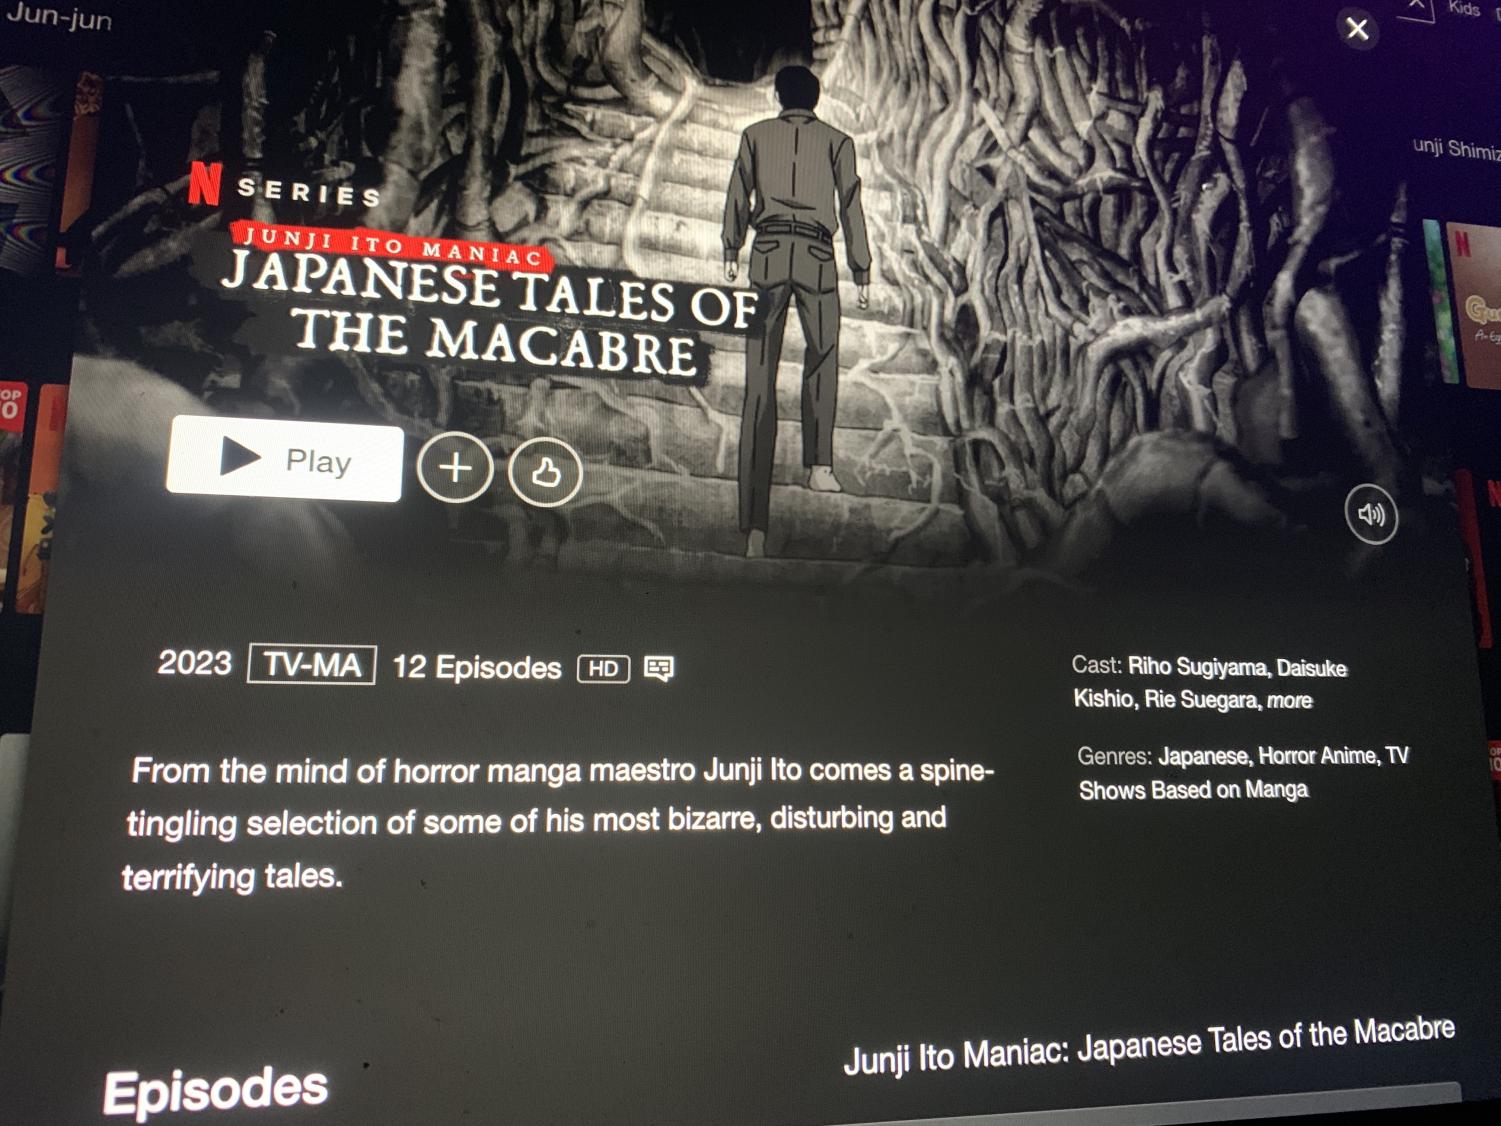 How to Watch Junji Ito Maniac: Japanese Tales of the Macabre on